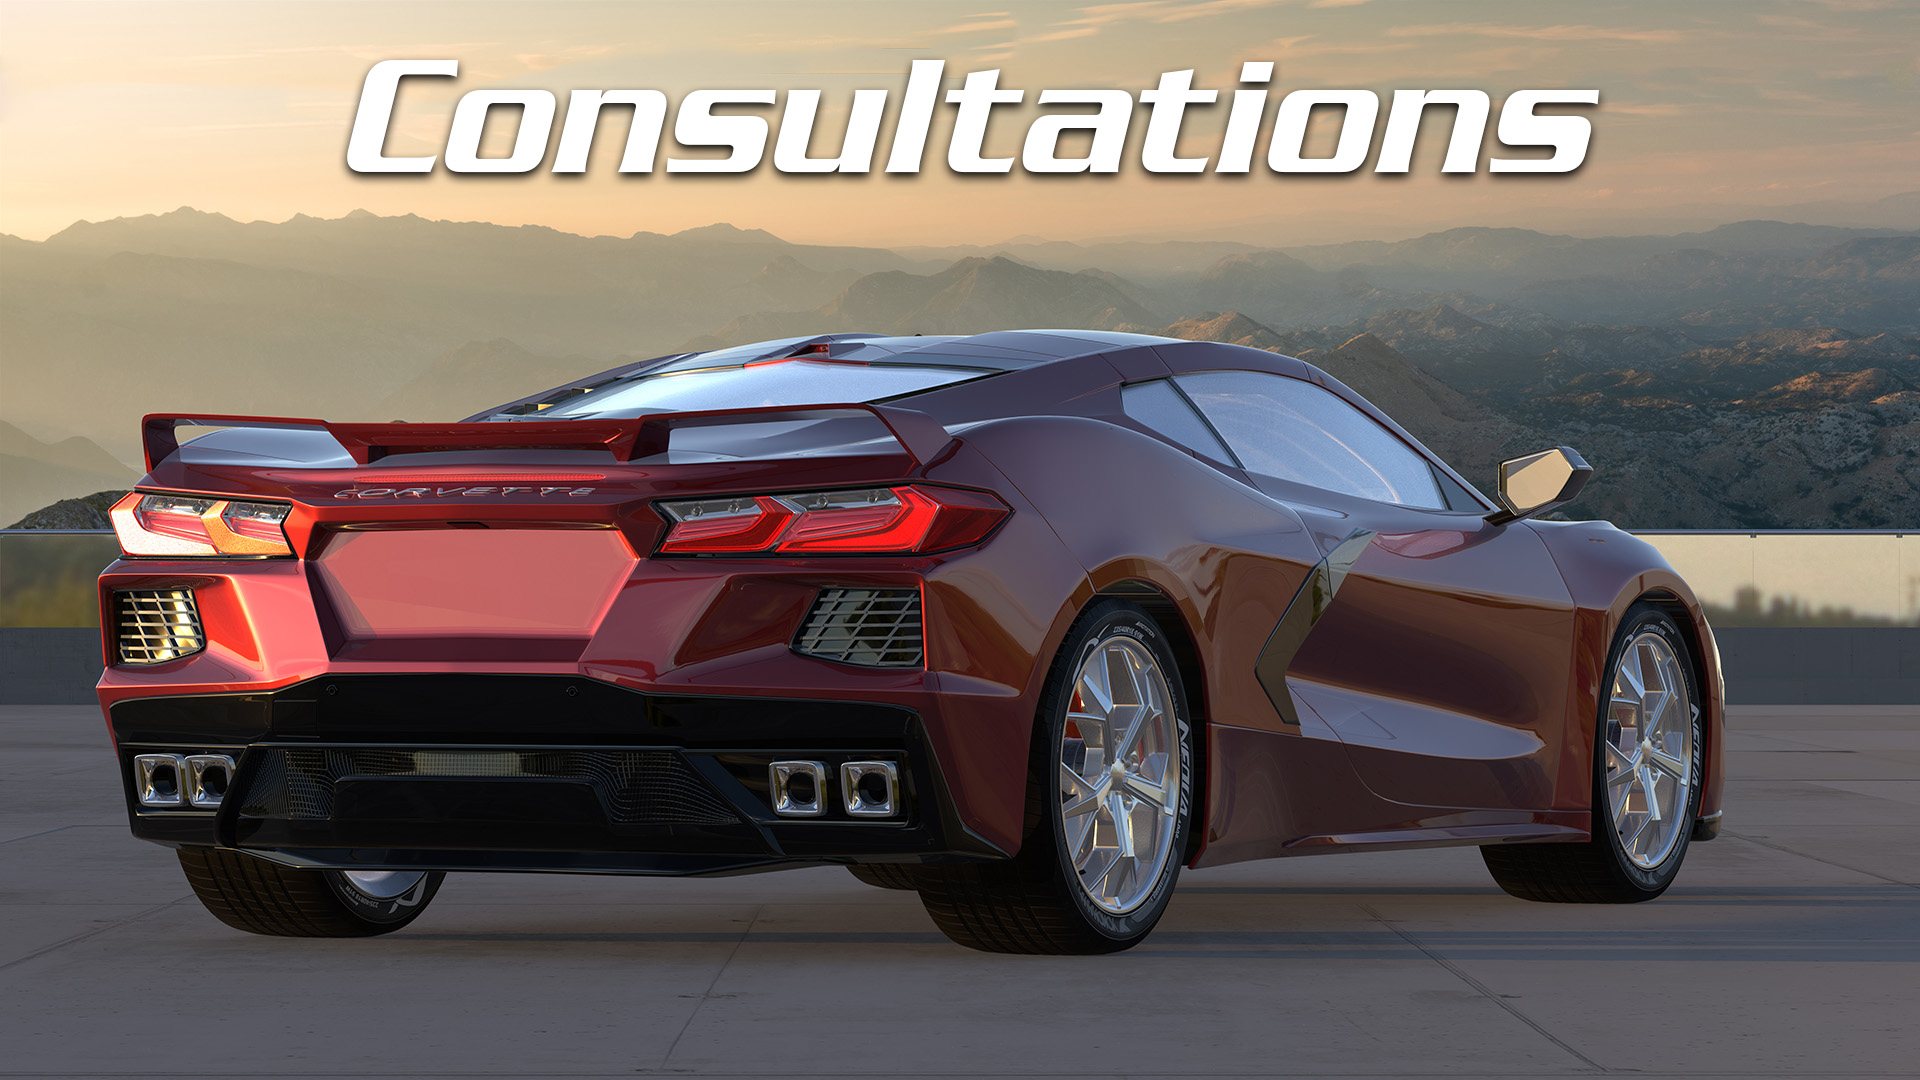 Deep Stage Tuning & Performance - Consultations